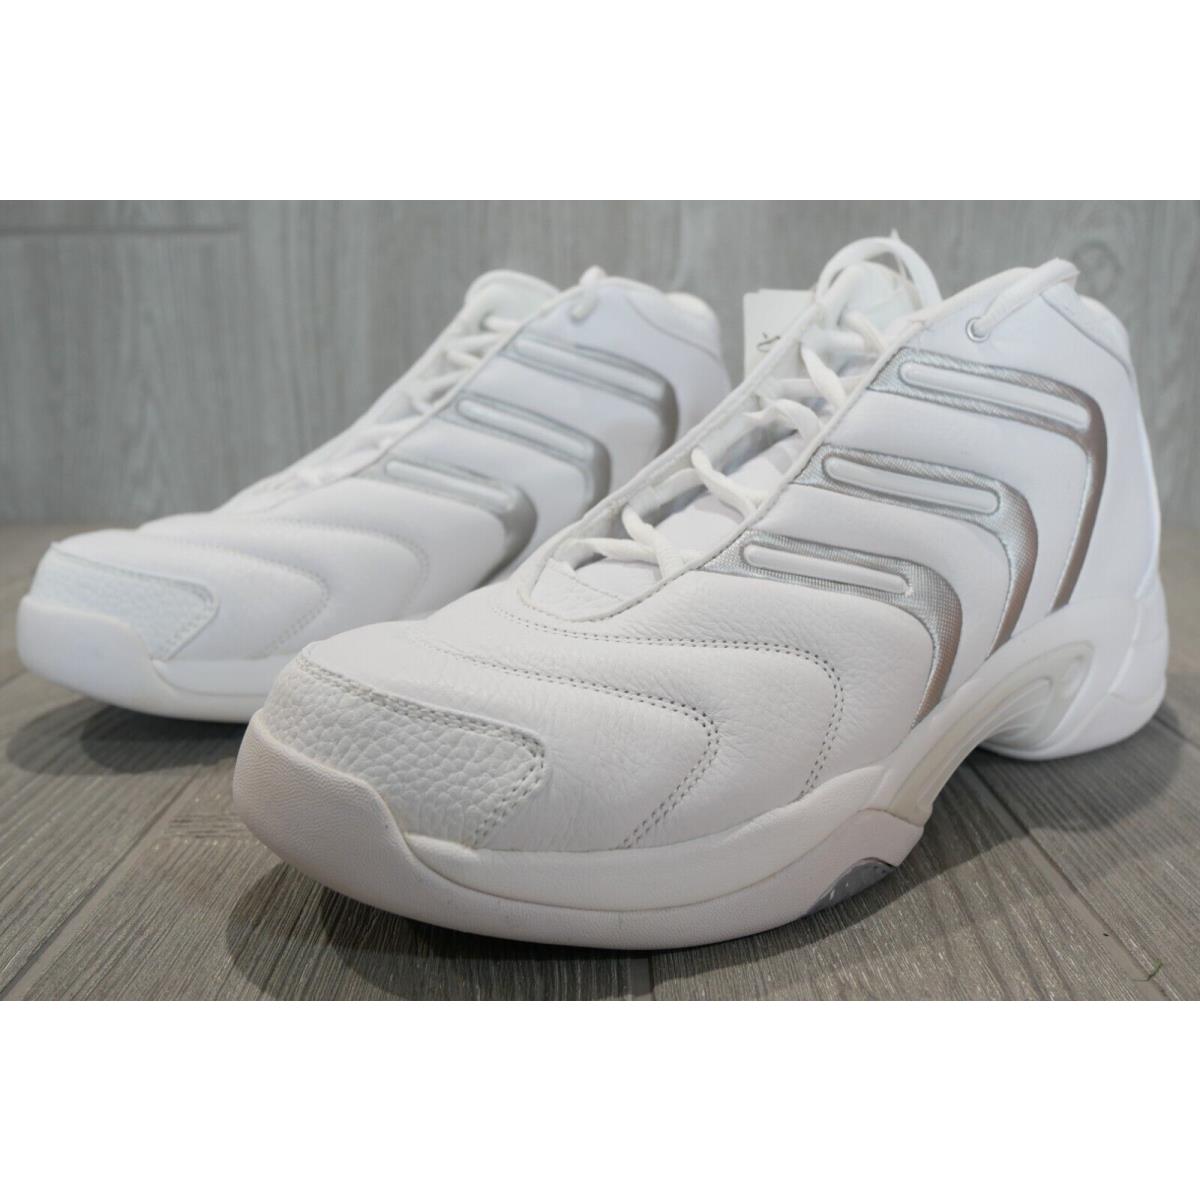 Adidas Wylin White Basketball Shoes 2004 Mens 9.5 11 Oss | 692740137865 Adidas shoes Vintage - |